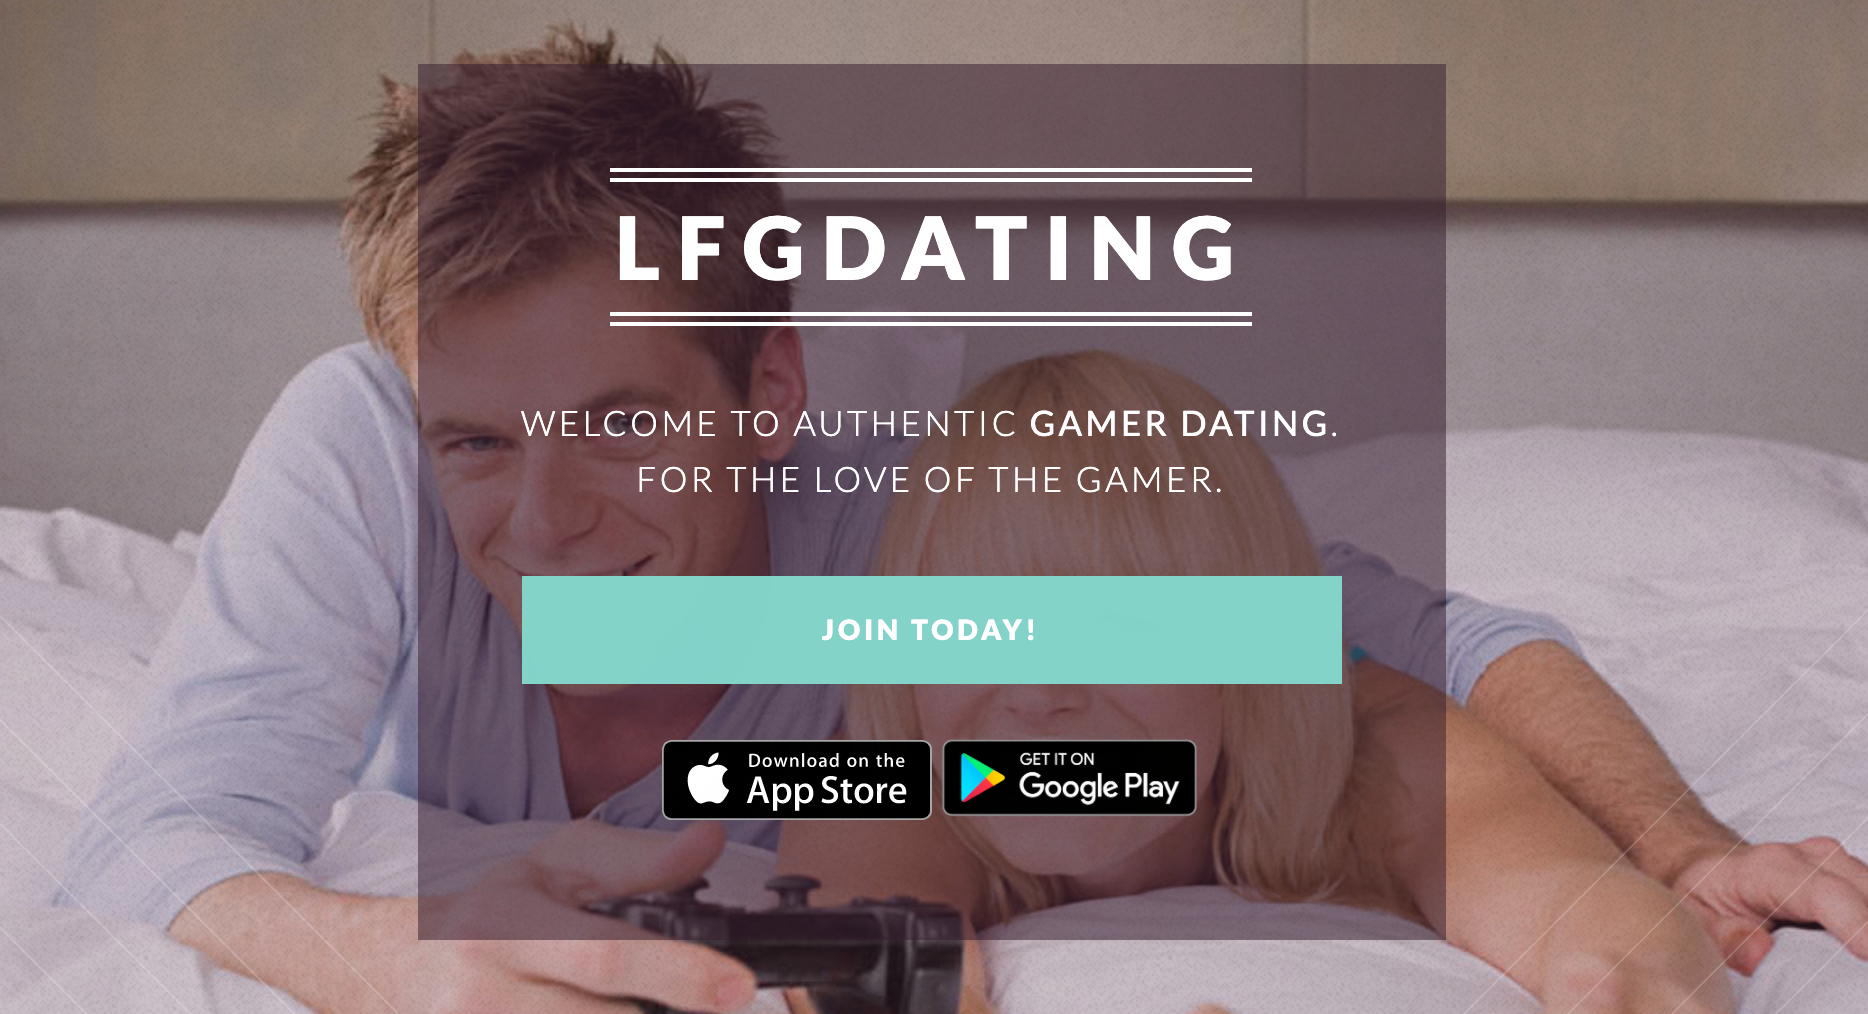 dating site for teenage gamers